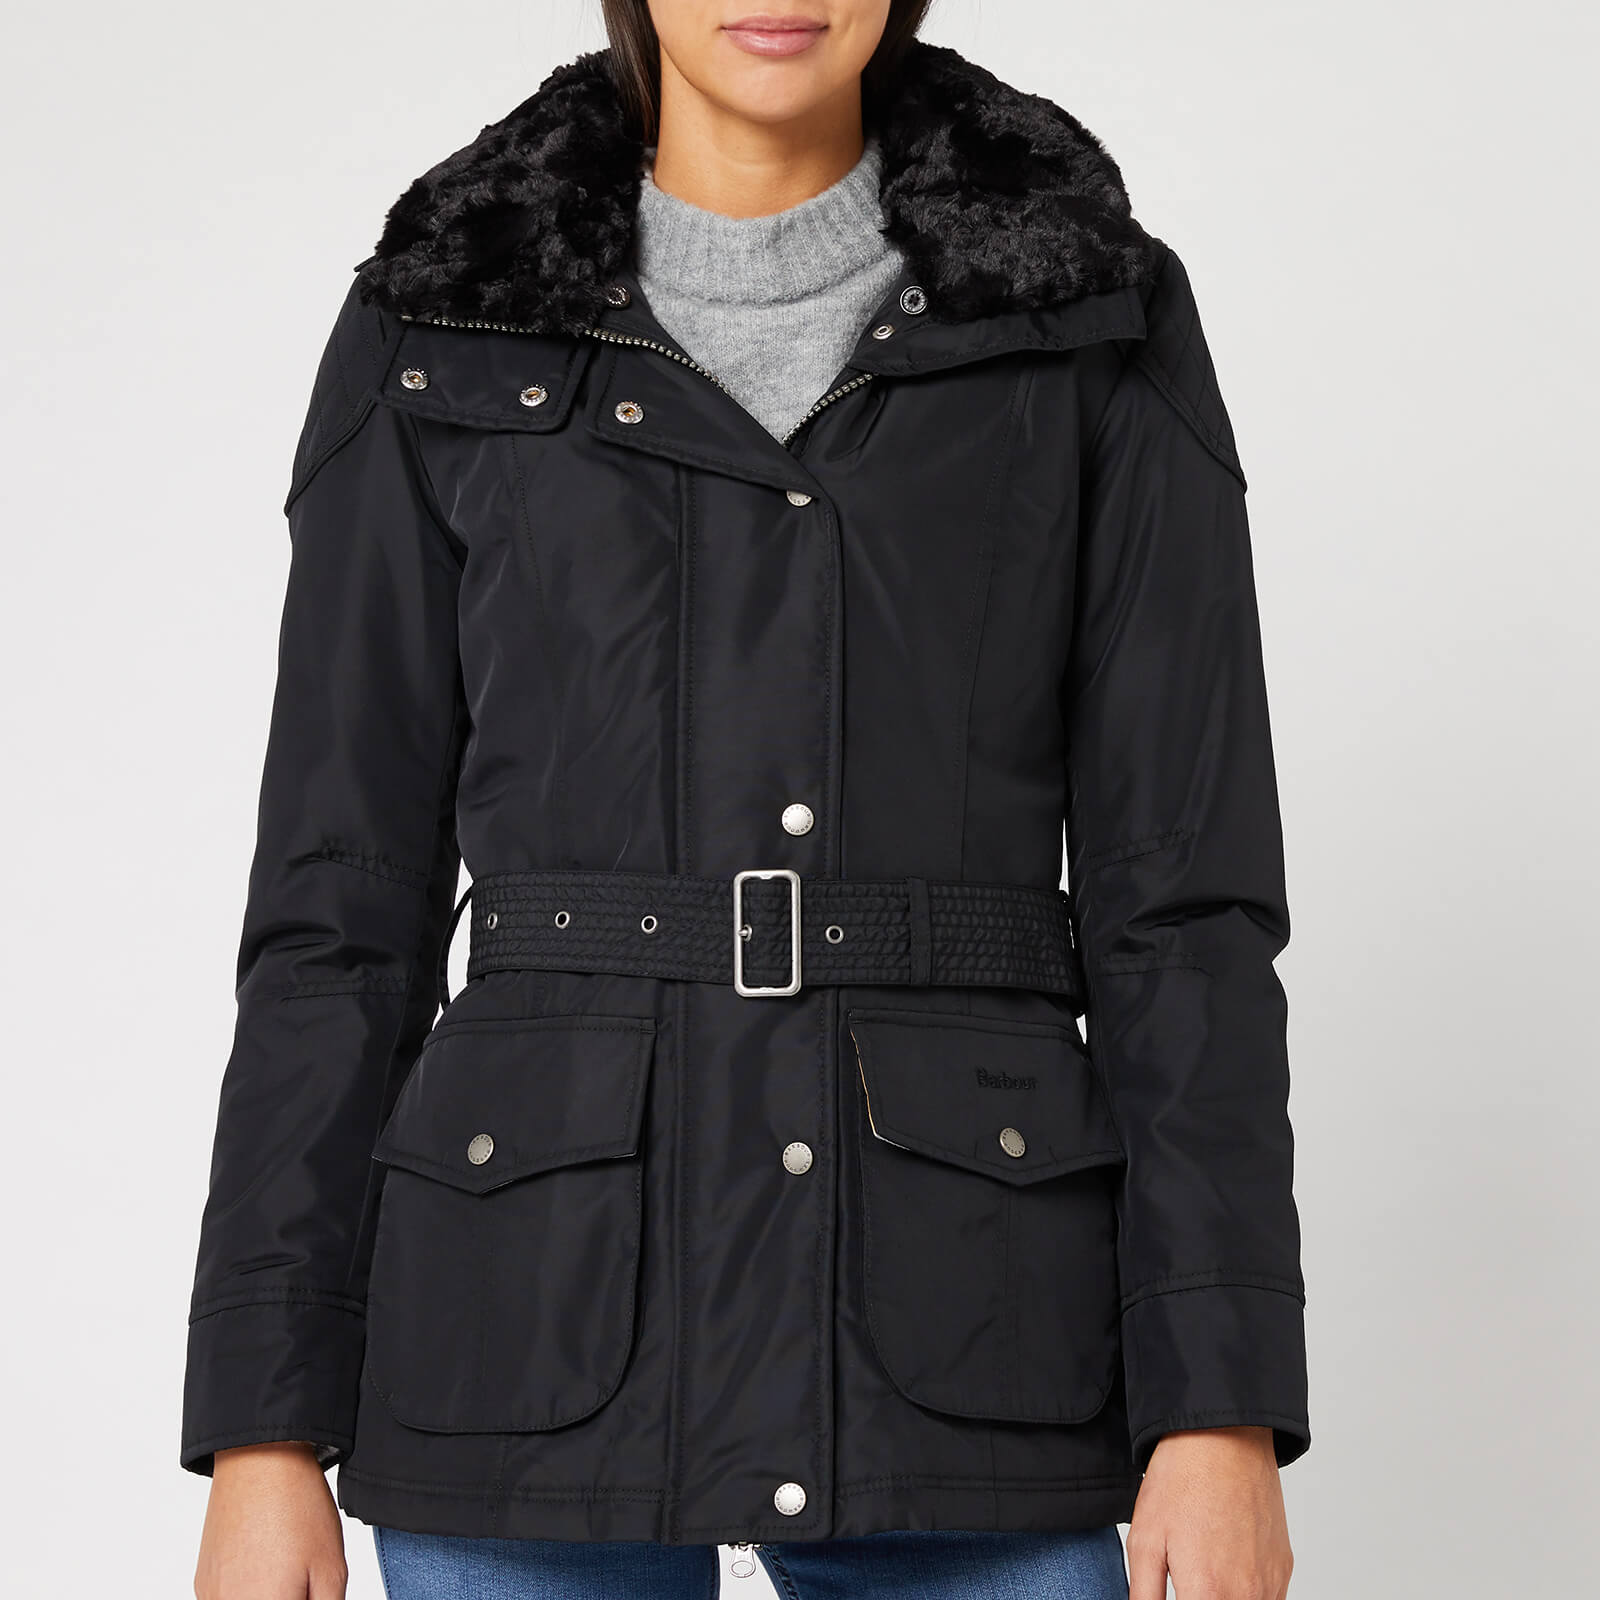 barbour outlaw jacket navy